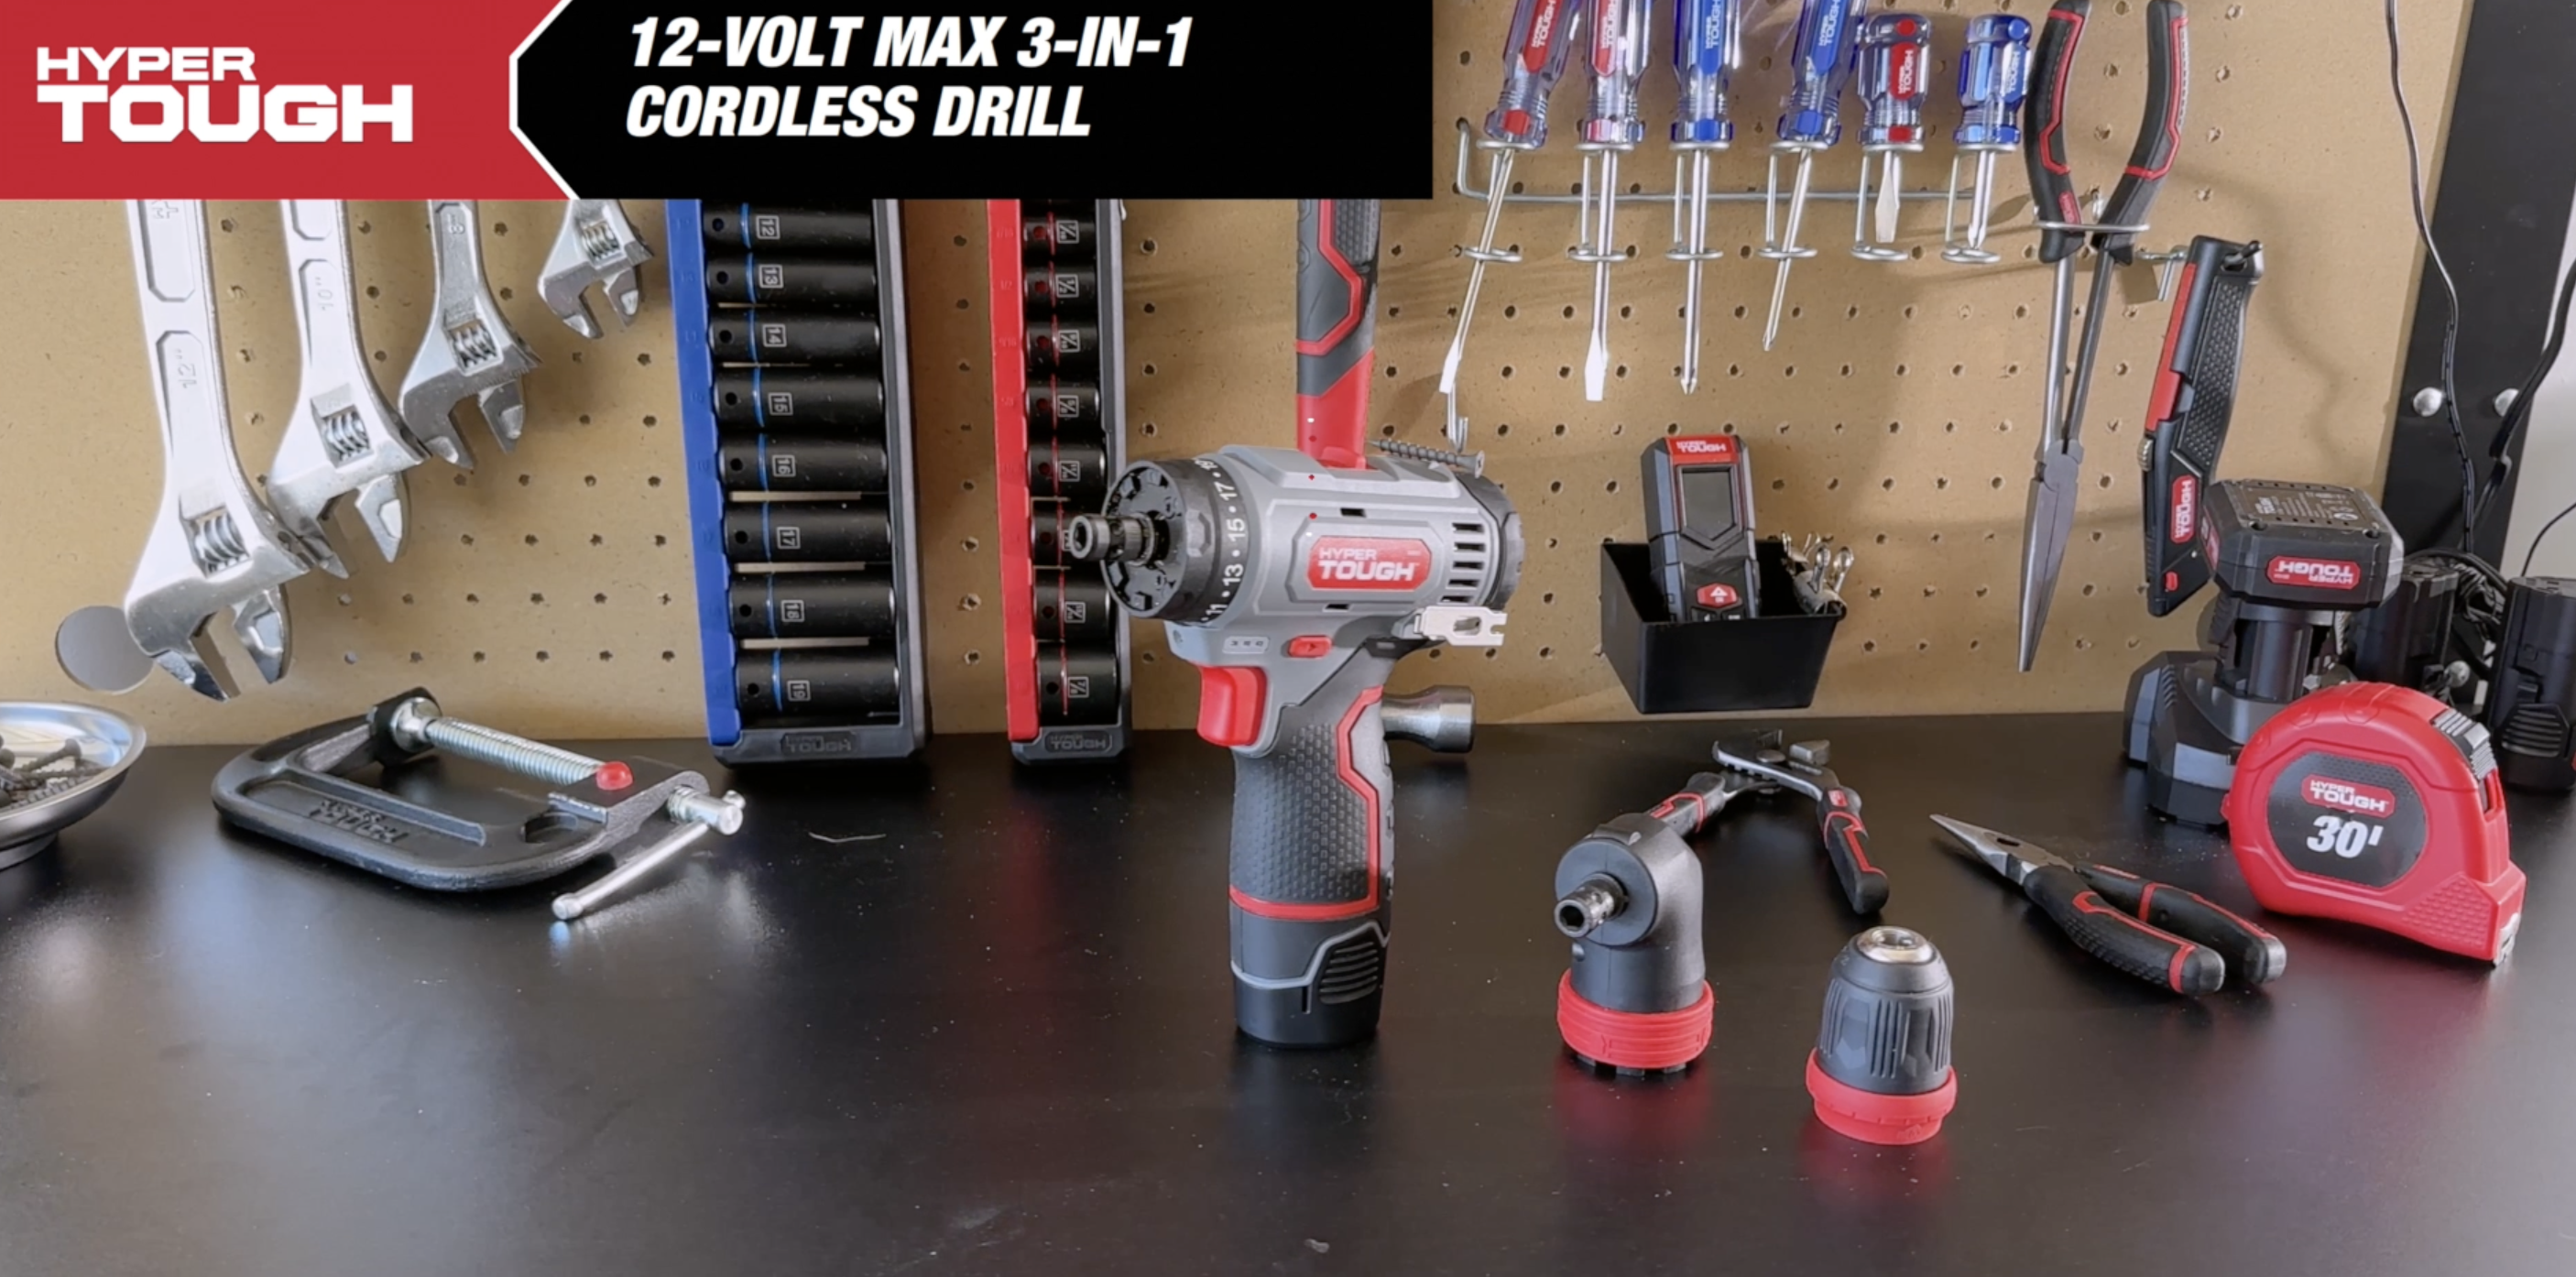 EnerTwist 20V Max Cordless Drill, 3/8 Inch Power Drill Set with